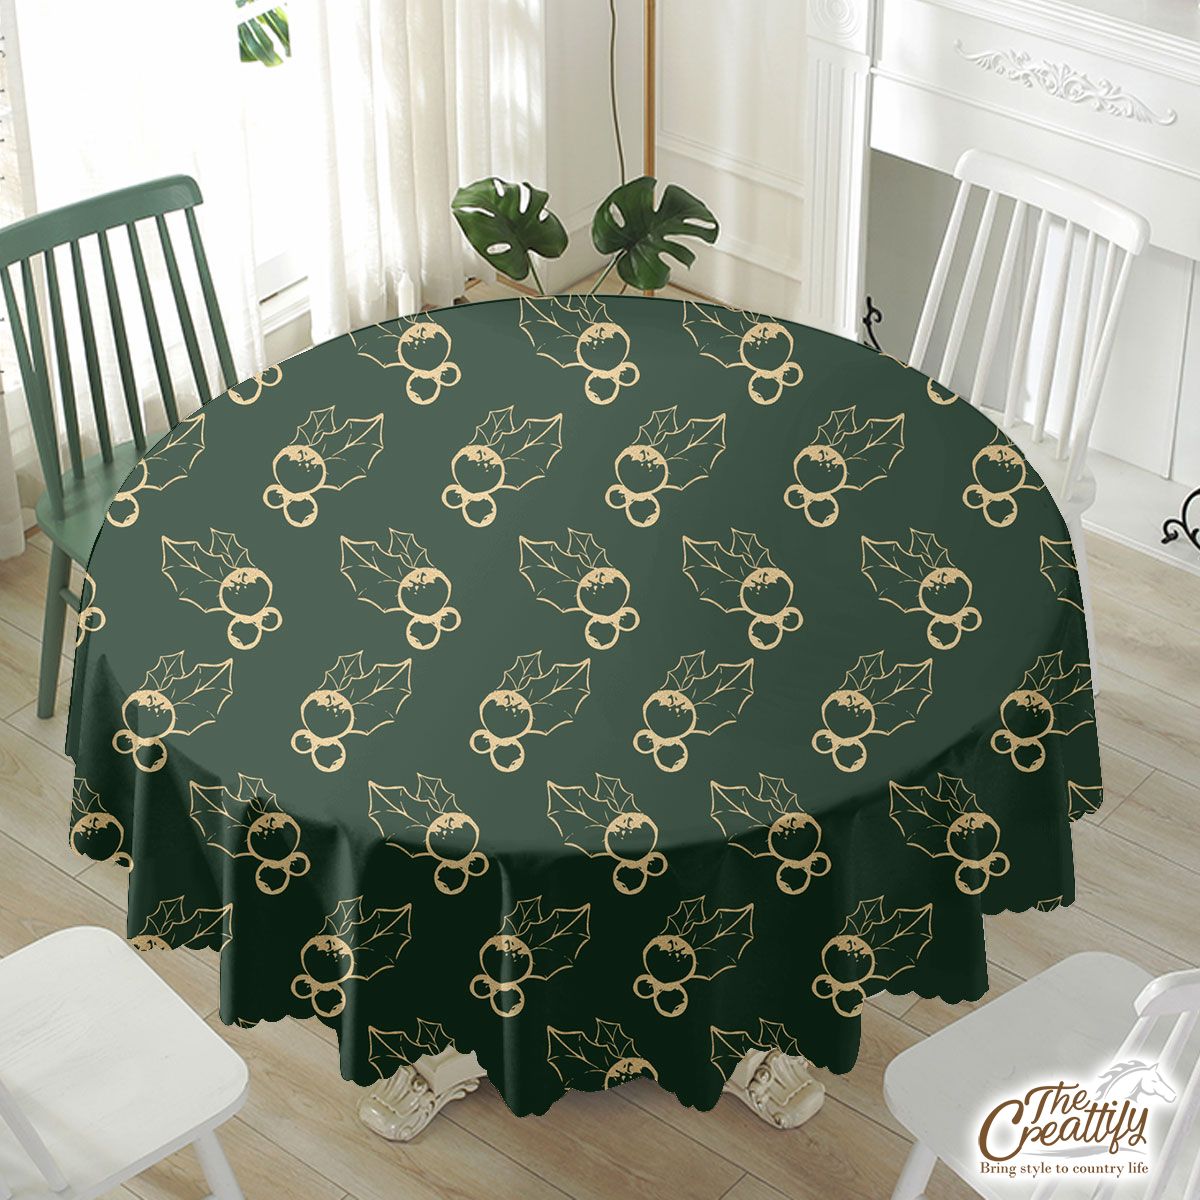 Gold And Green Holly Leaf Waterproof Tablecloth